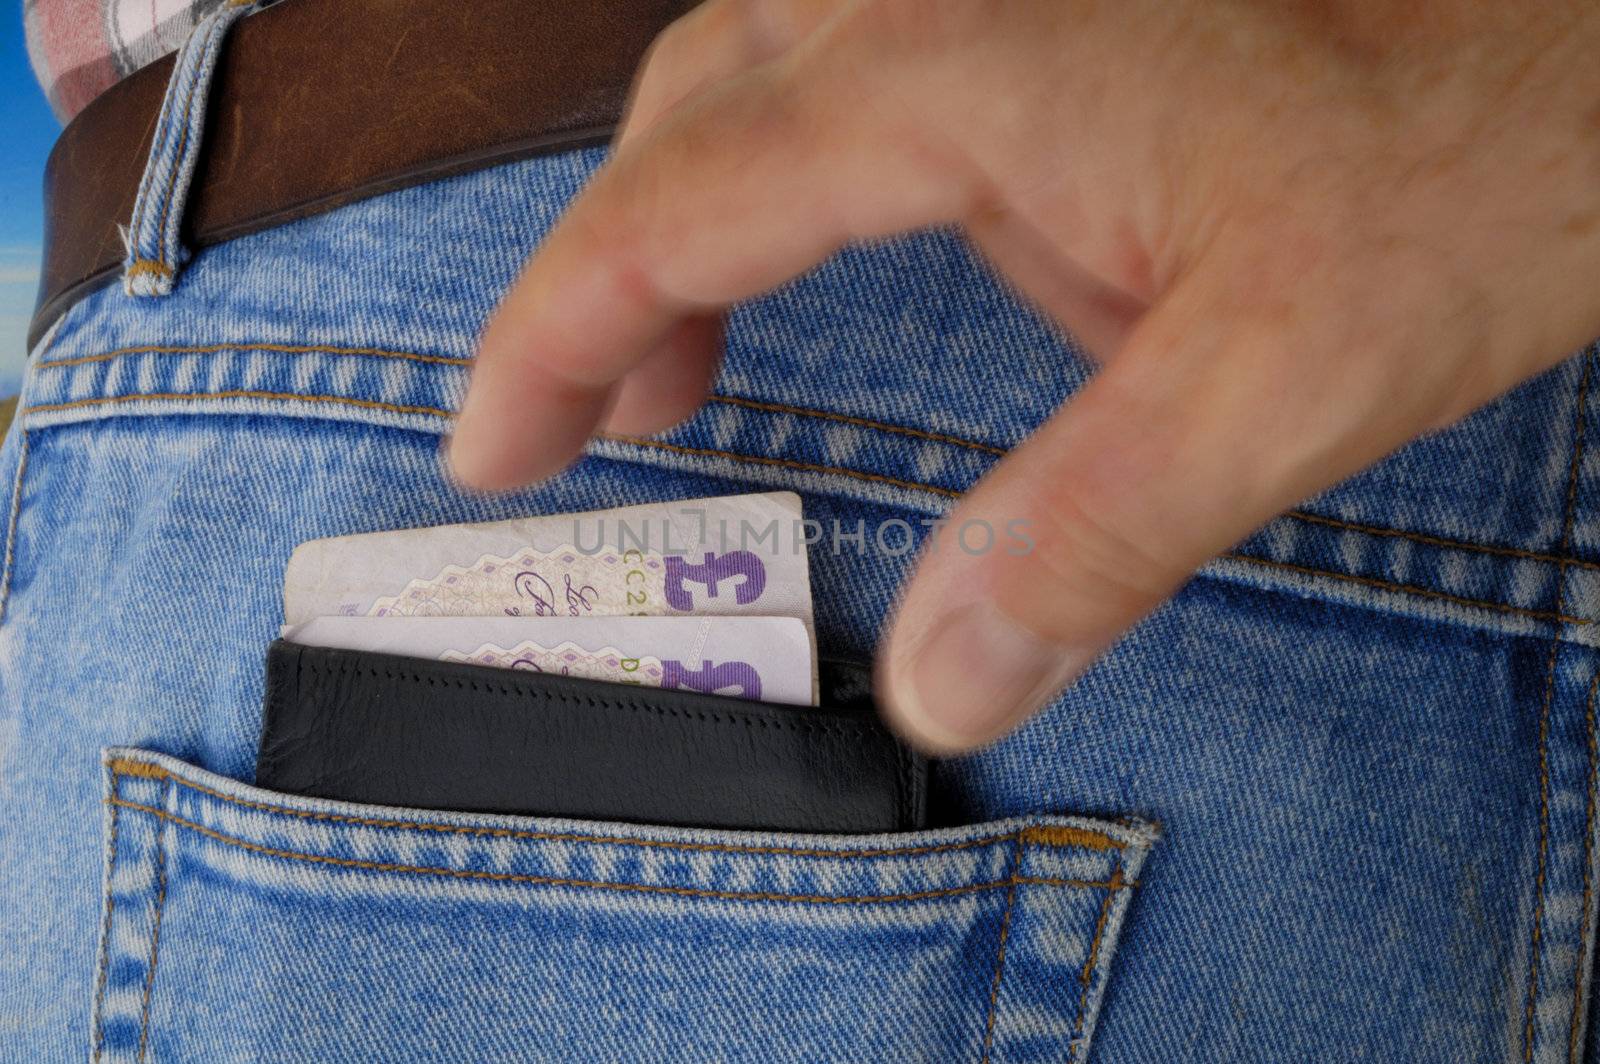 A wallet with two 20 pound notes pokes out of the rear pocket of a traveller's jeans. Motion blur on a pickpocket's hand, about to take it.